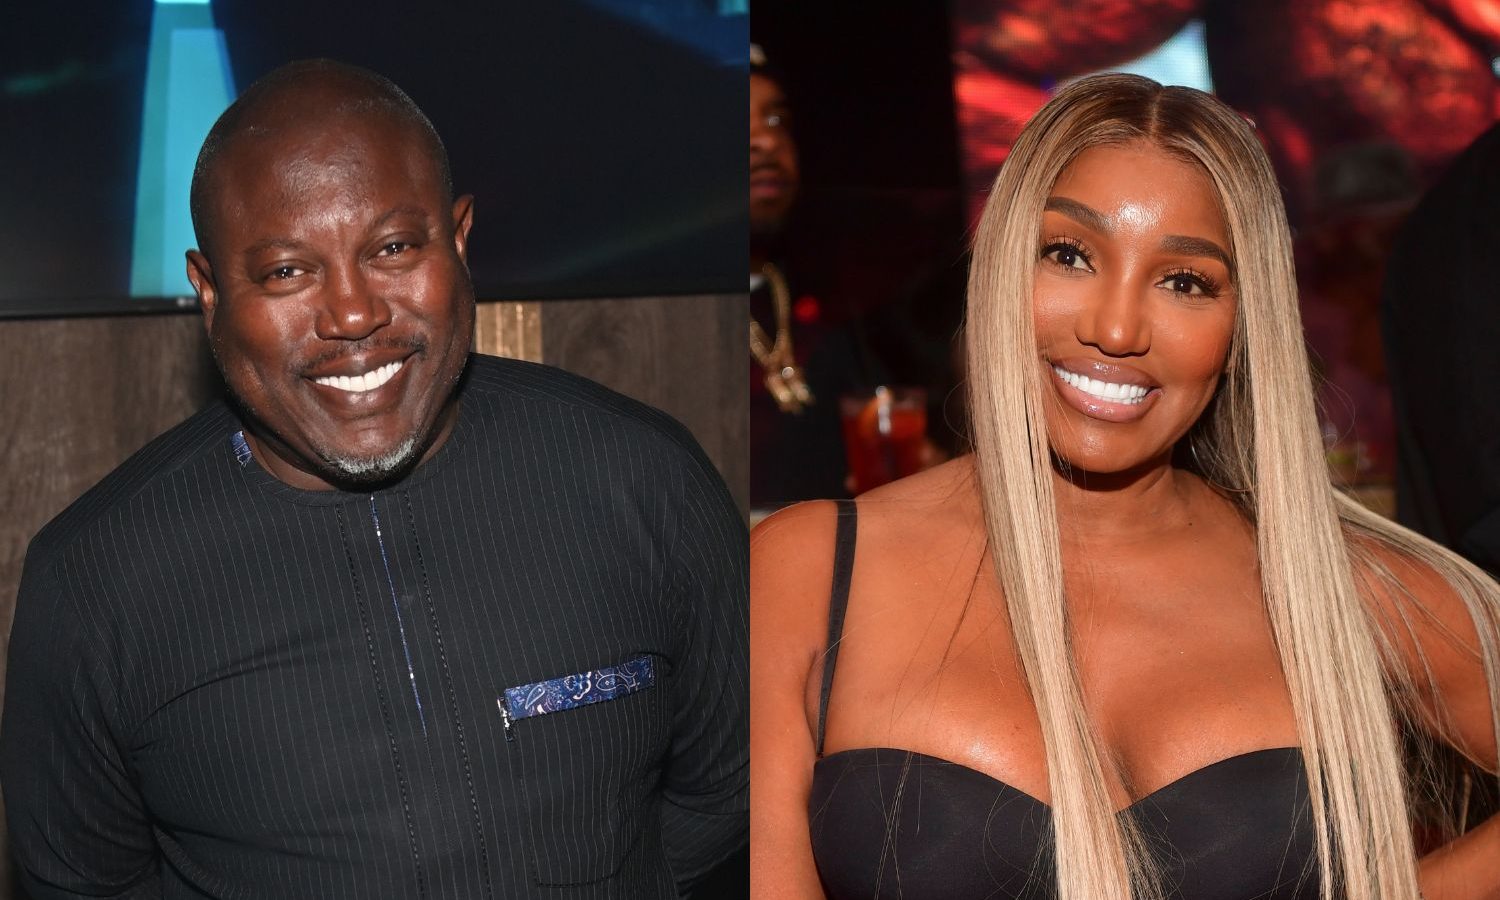 Yikes! Simon Guobadia Pops Out With A Lady Friend & NeNe Leakes After She Slammed Porsha Williams